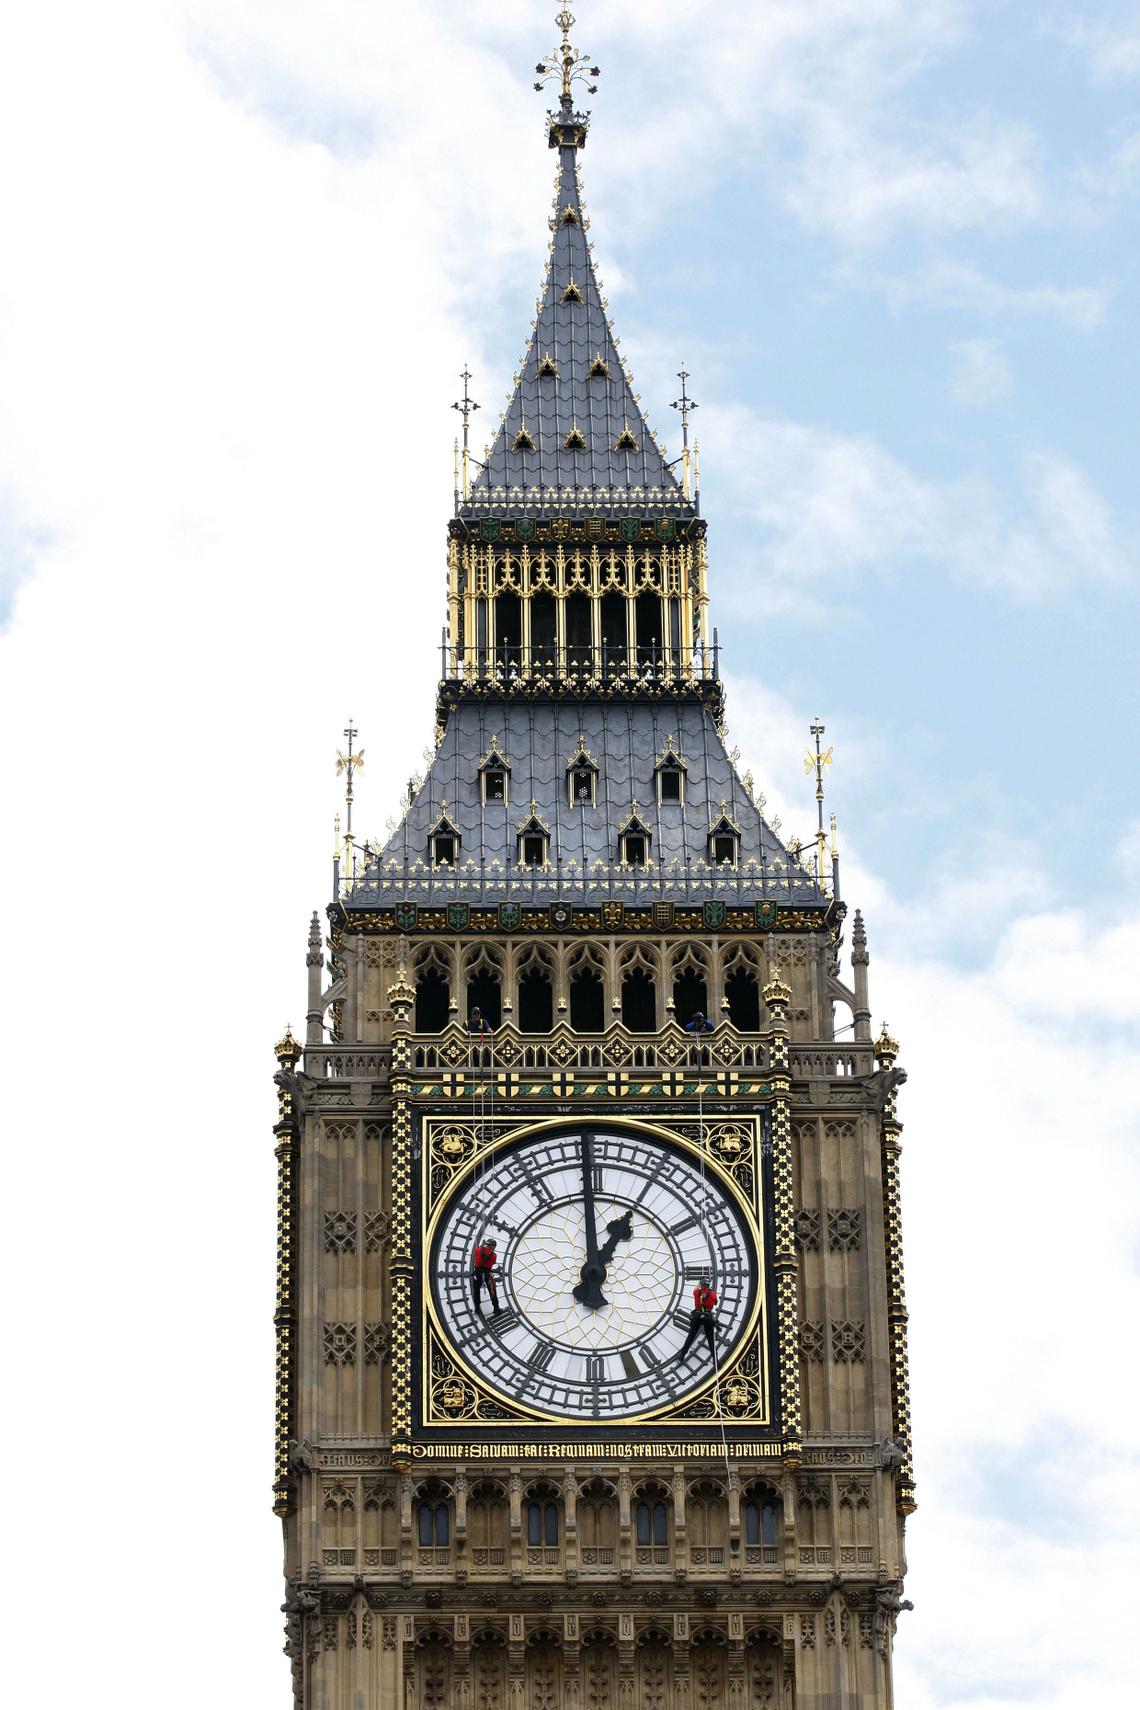 Just a few more bongs for Big Ben before London bell is silenced for ...